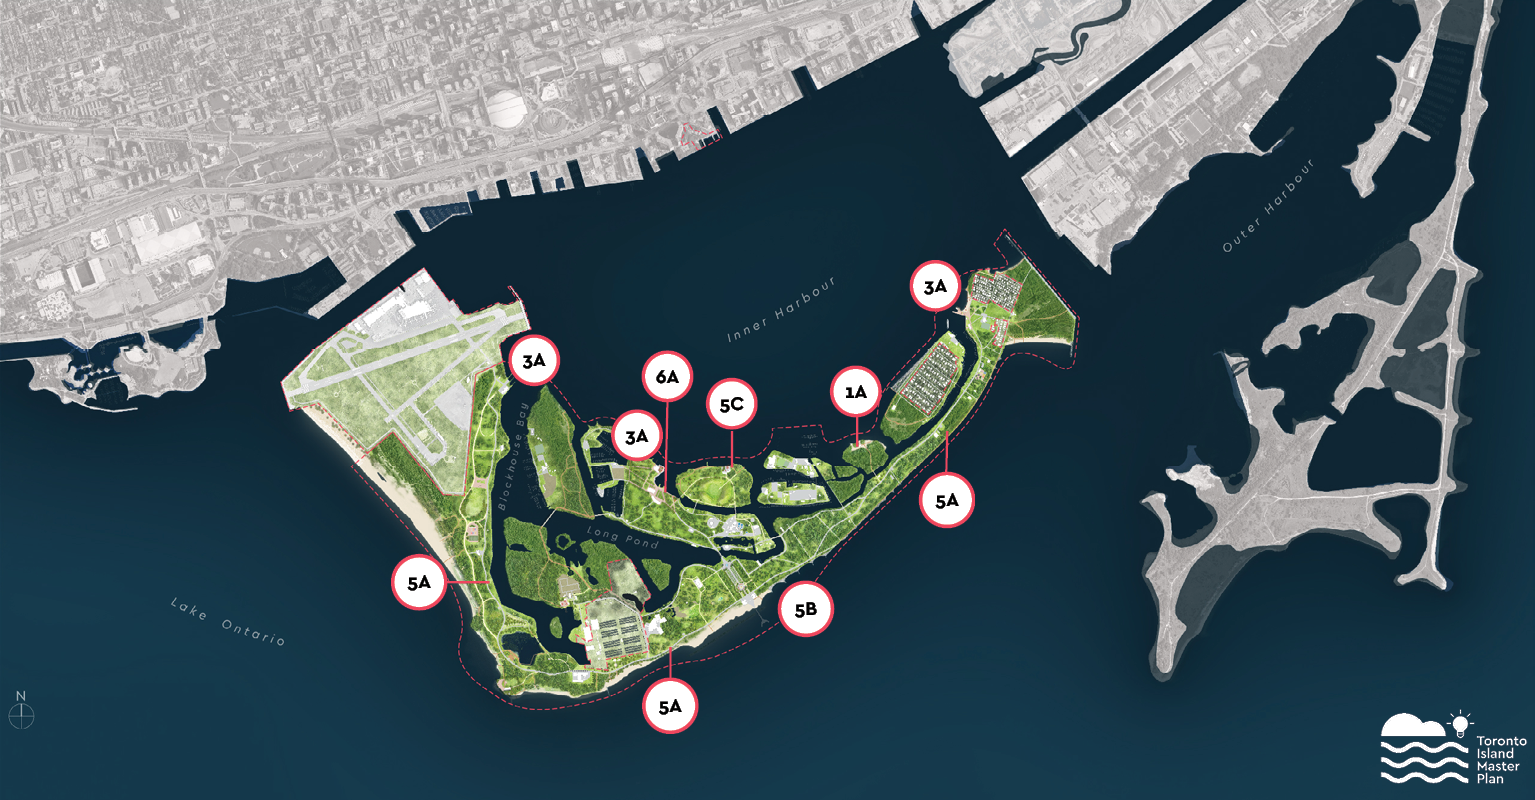 Illustrative map of Toronto Island Park showing potential locations for the Supporting Actions as described as in the preceding list. 